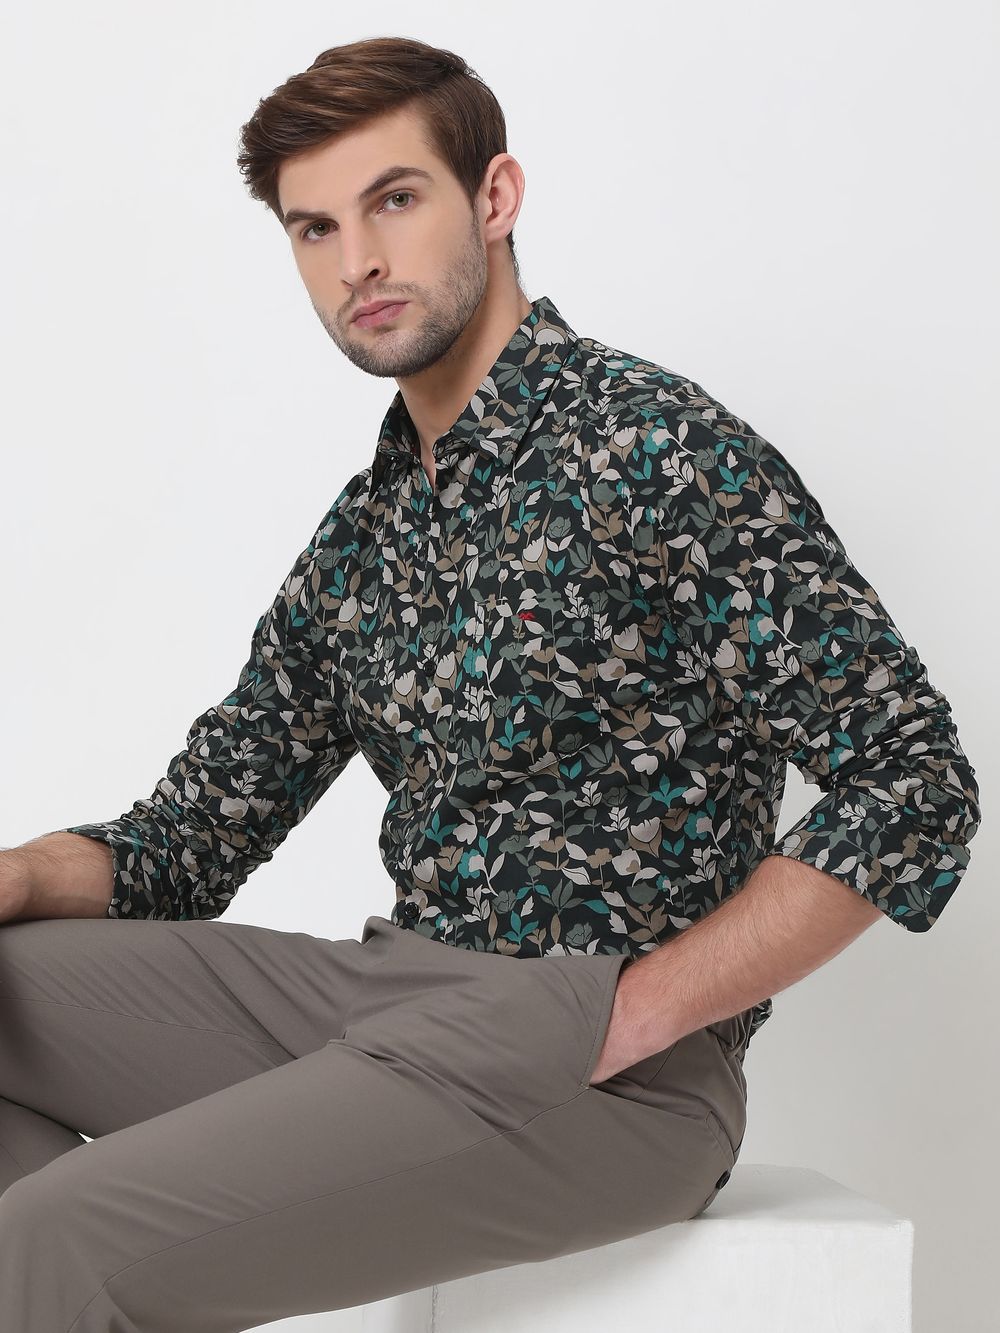 Green & Off White Floral Print Slim Fit Casual Shirt